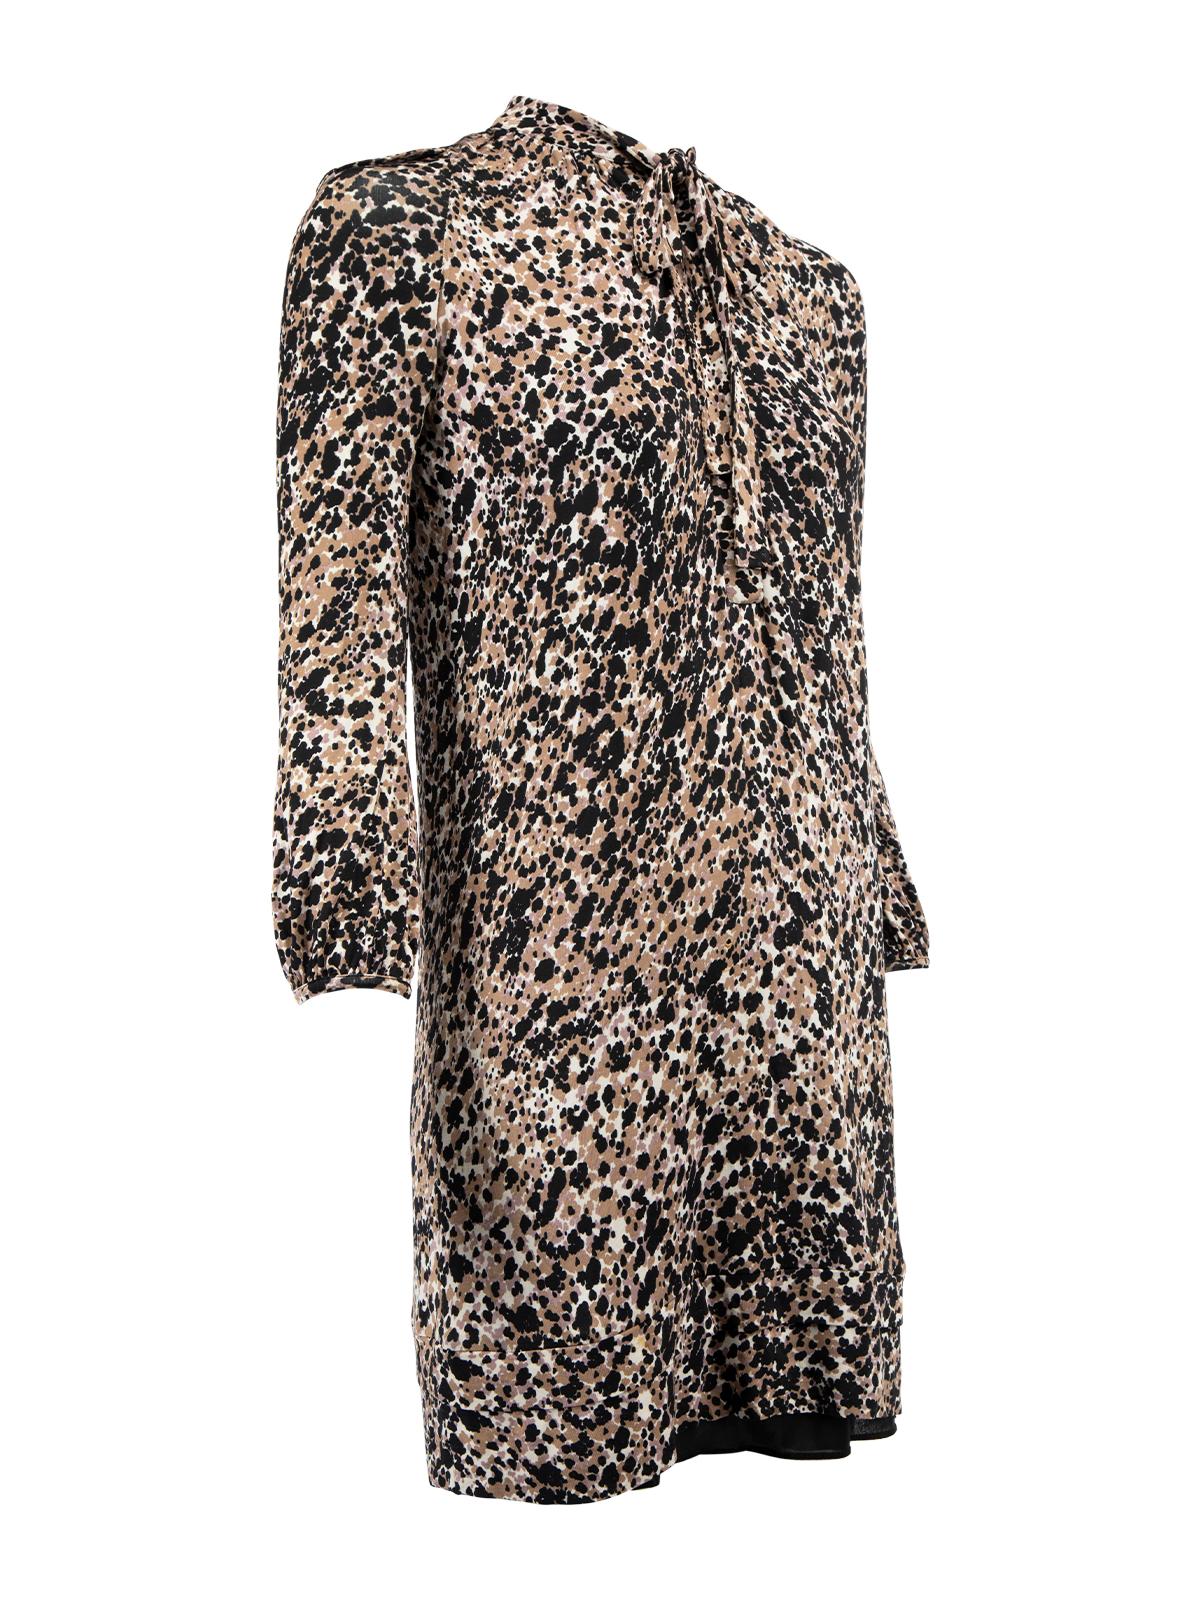 CONDITION is Very good. Minimal wear to dress is evident. Minimal wear to outer viscose fabric on this used Burberry designer resale item. Details Multicolour- Black, brown and grey Viscose Above knee length dress Leopard print Long sleeves Stand